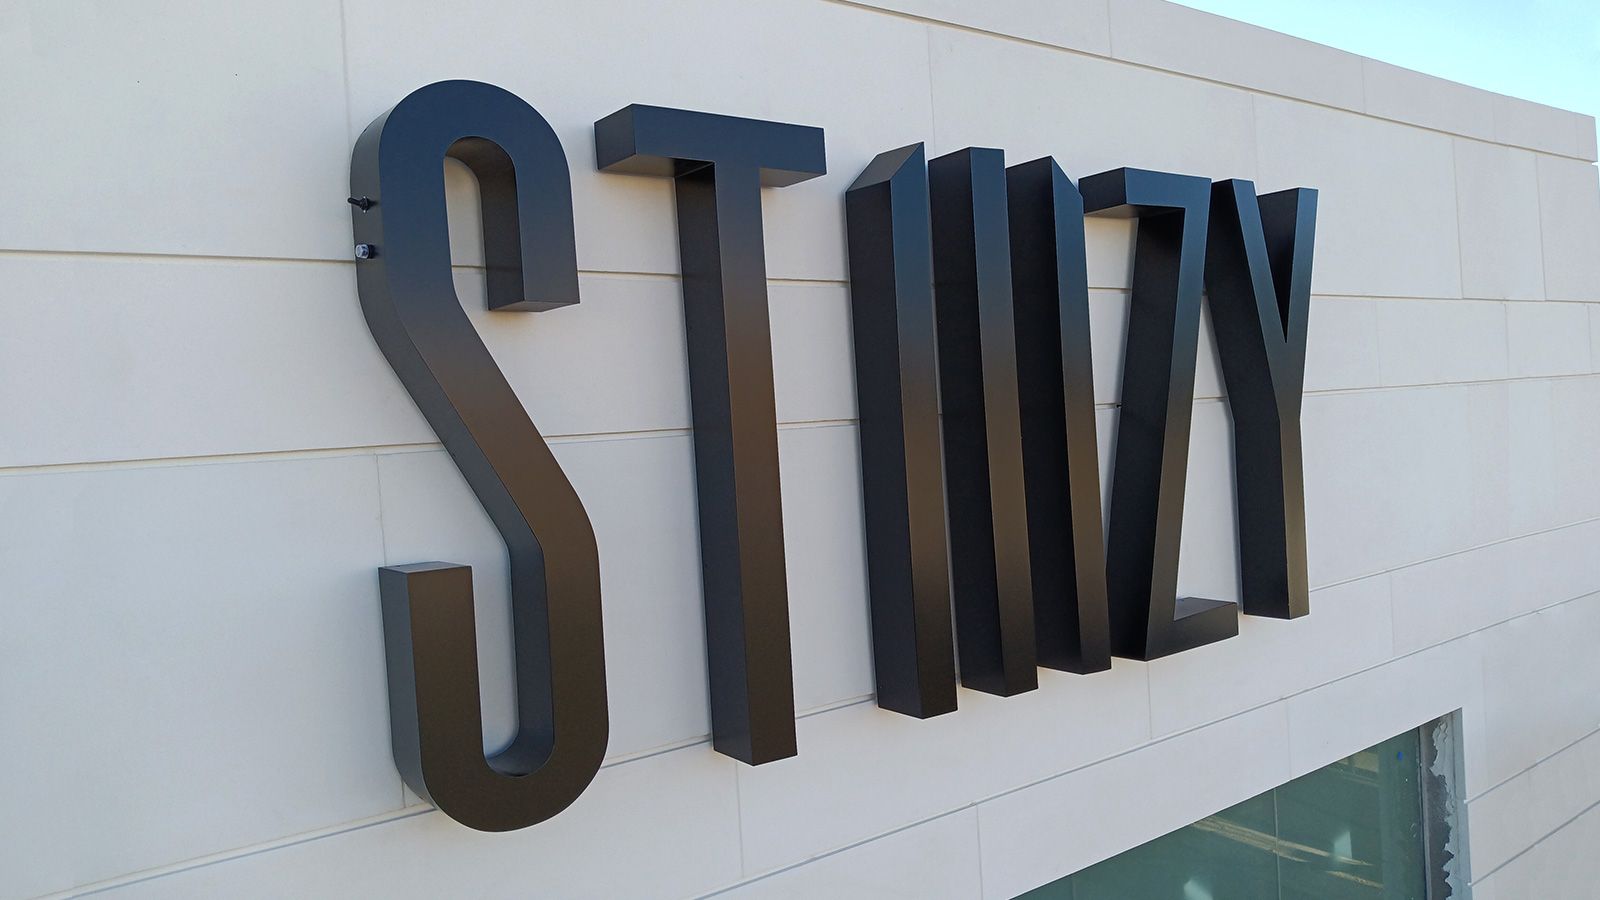 Stilizy channel letters